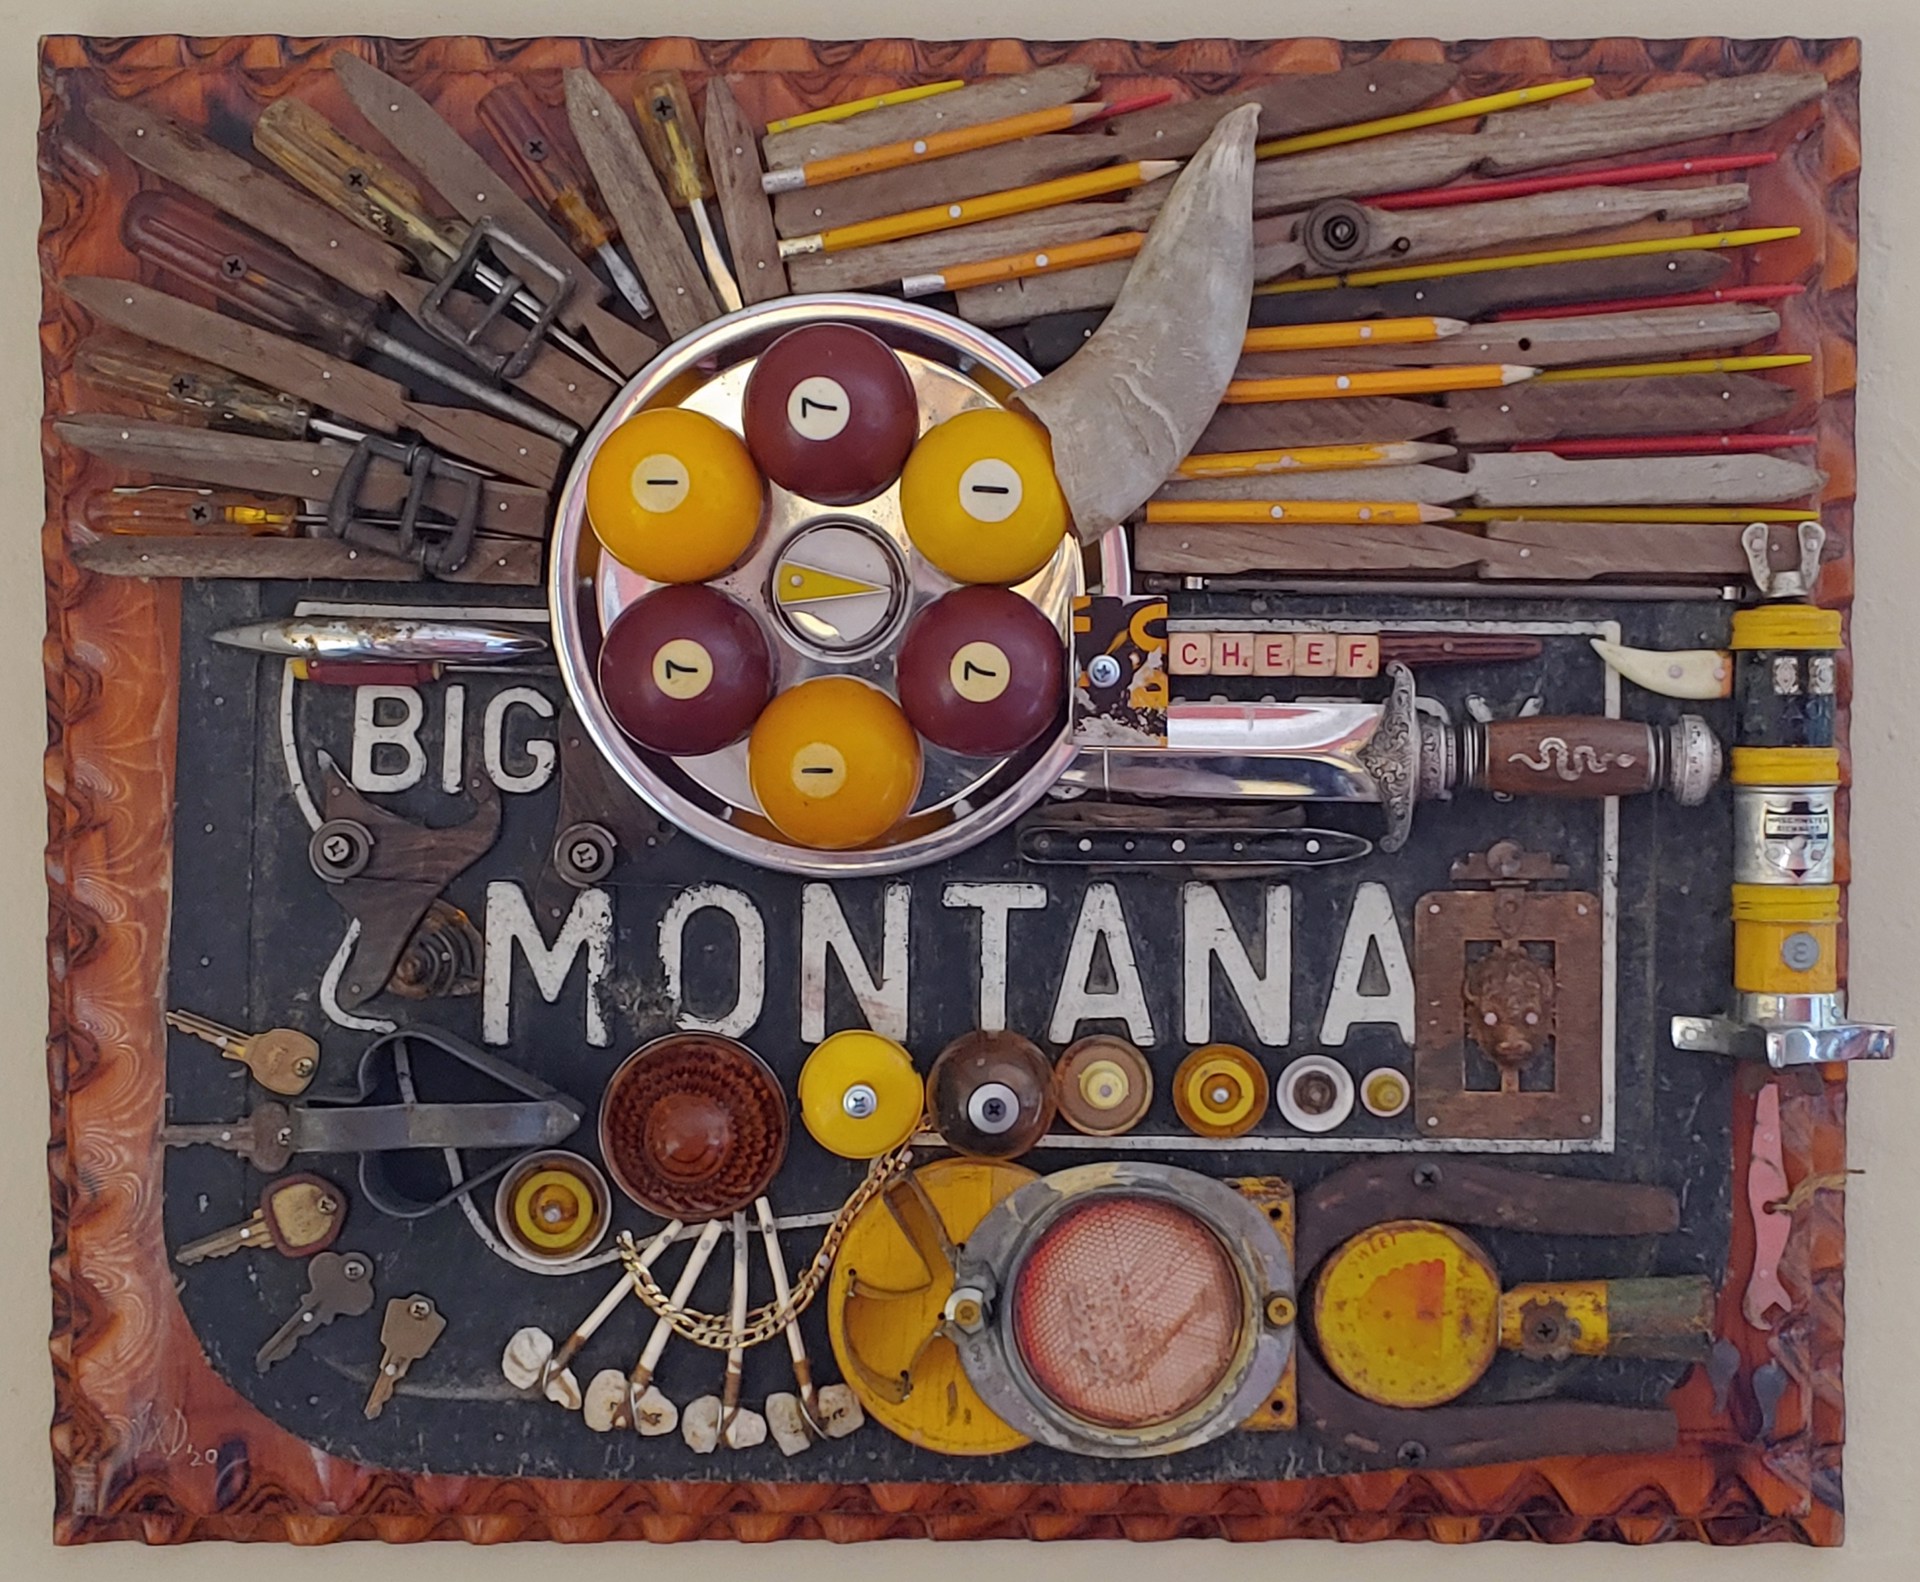 Big Chief Montana by Jimmy Descant